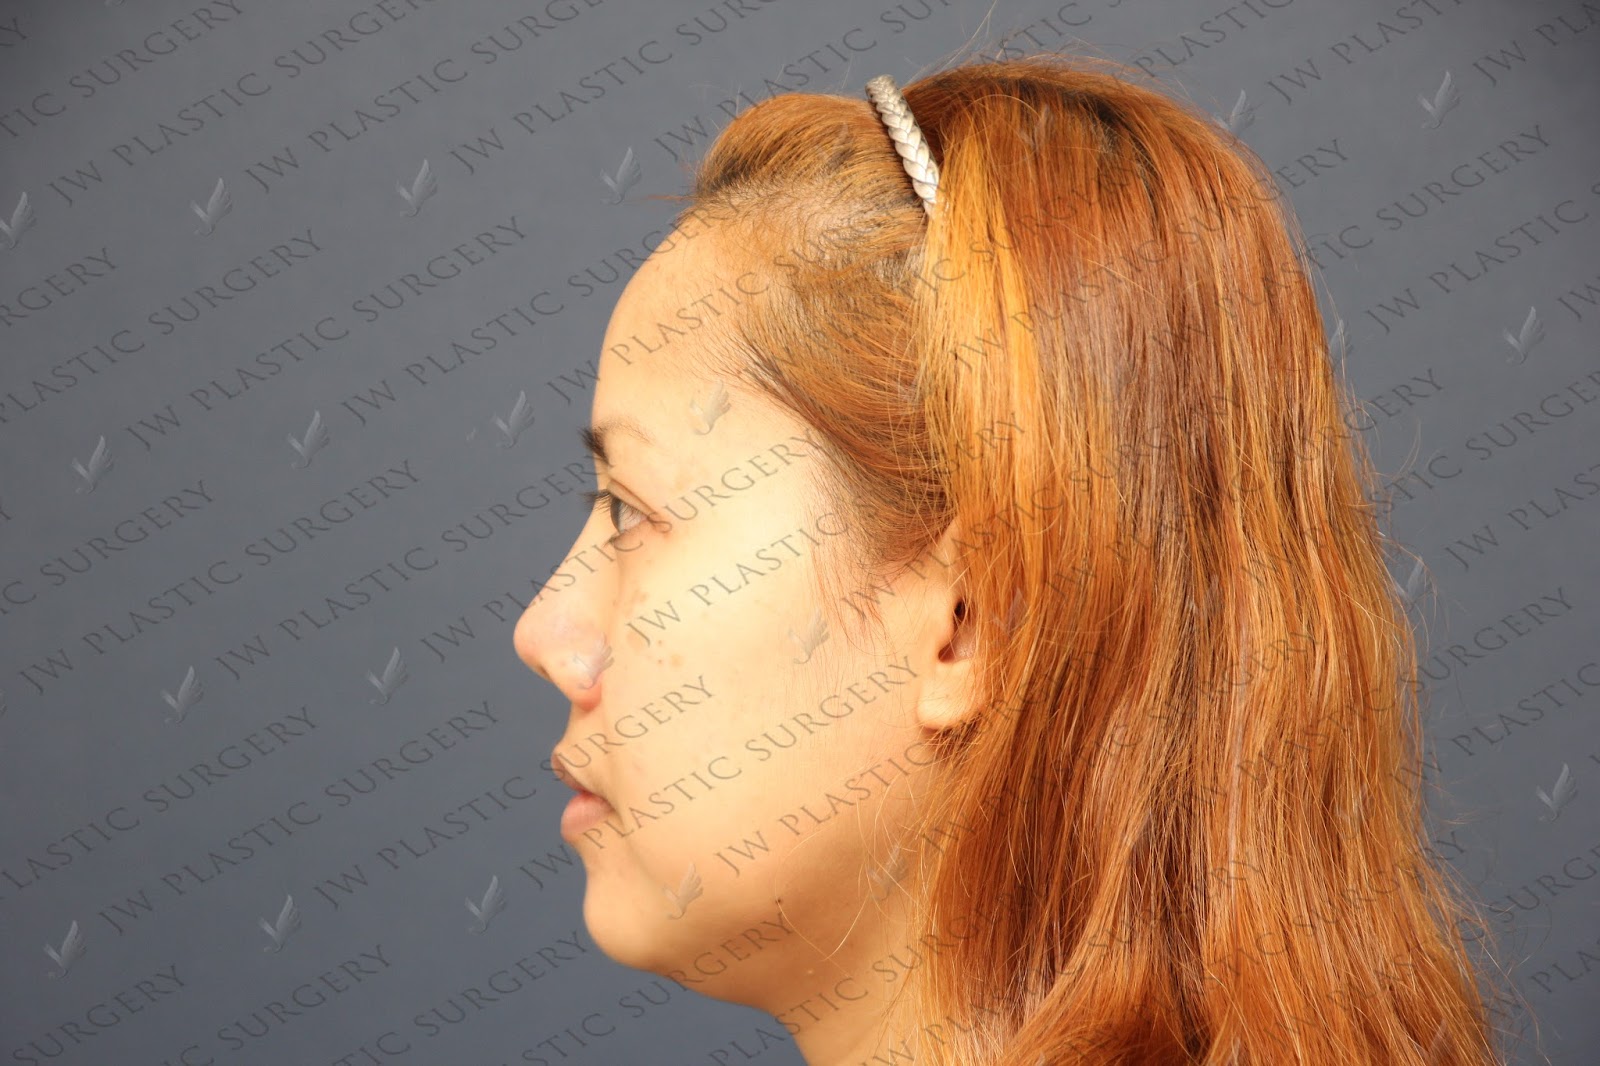 Face Lift By Made Double Eyelid Incision Accusculpt Lift Jowlneck